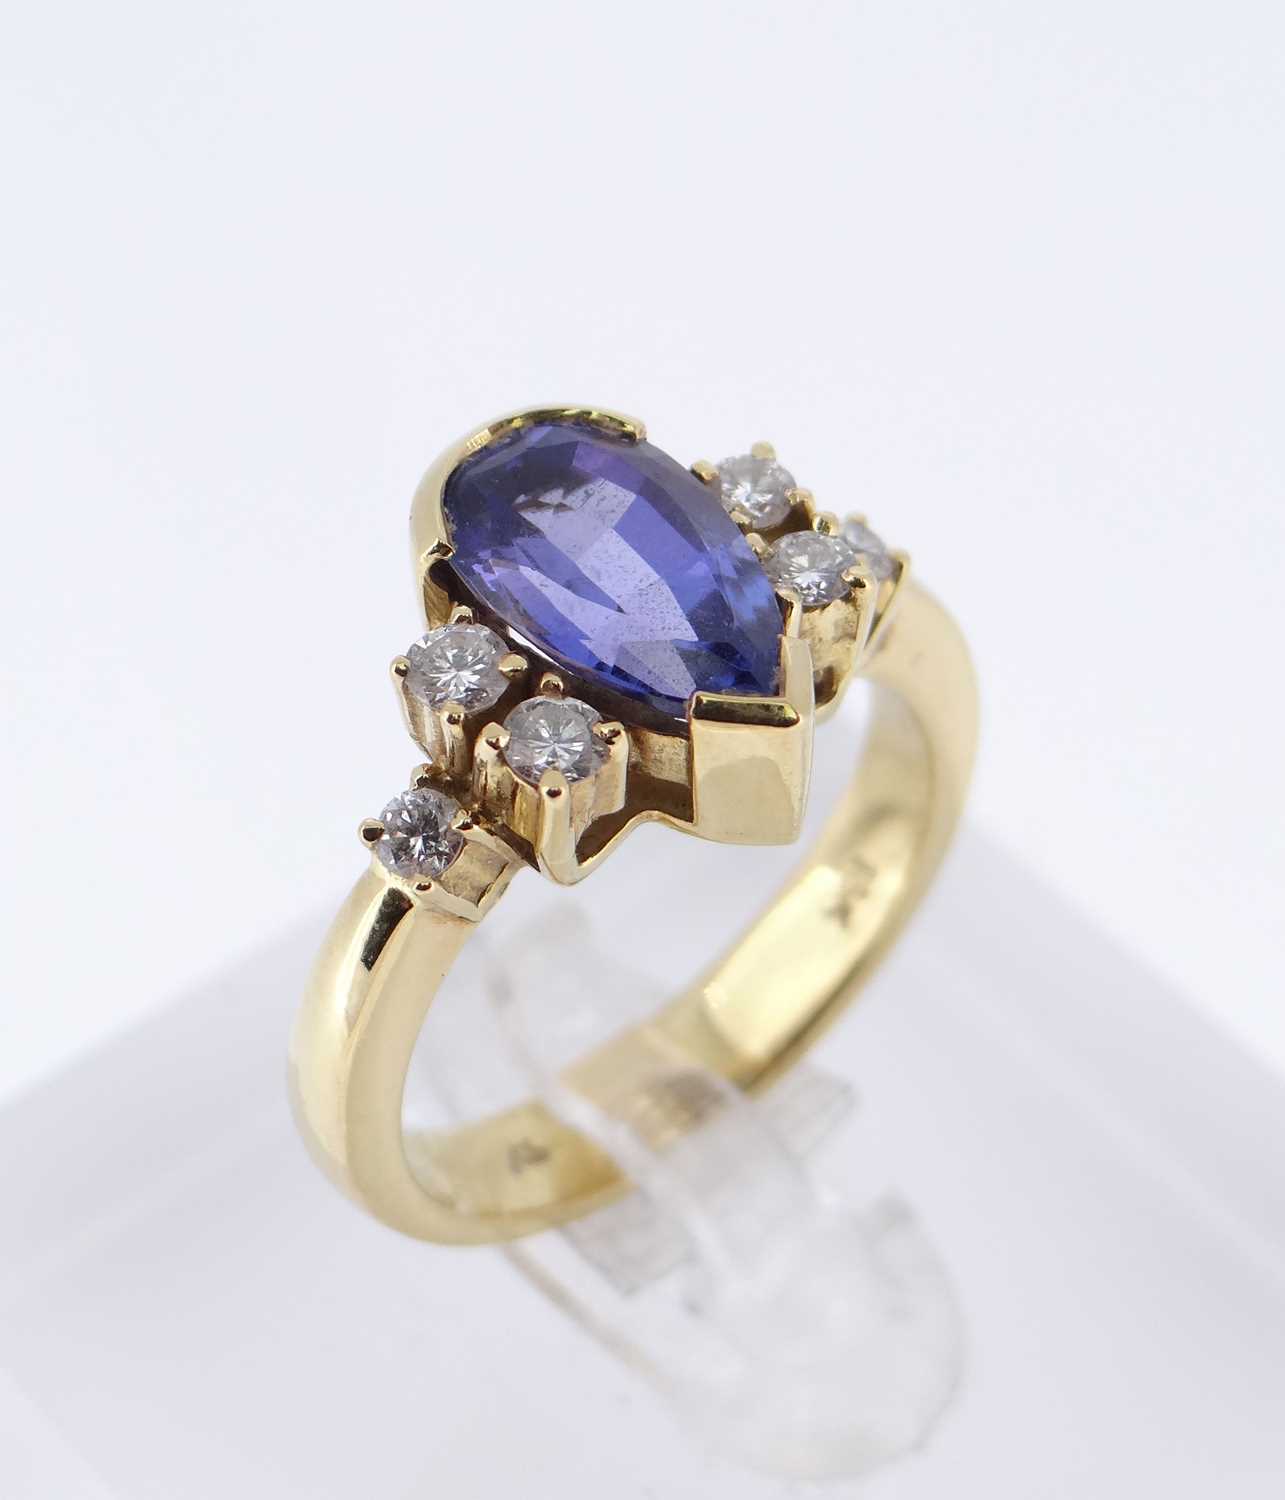 18K GOLD TANZANITE & DIAMOND RING, the central pear shaped tanzanite flanked by three diamonds - Image 3 of 4